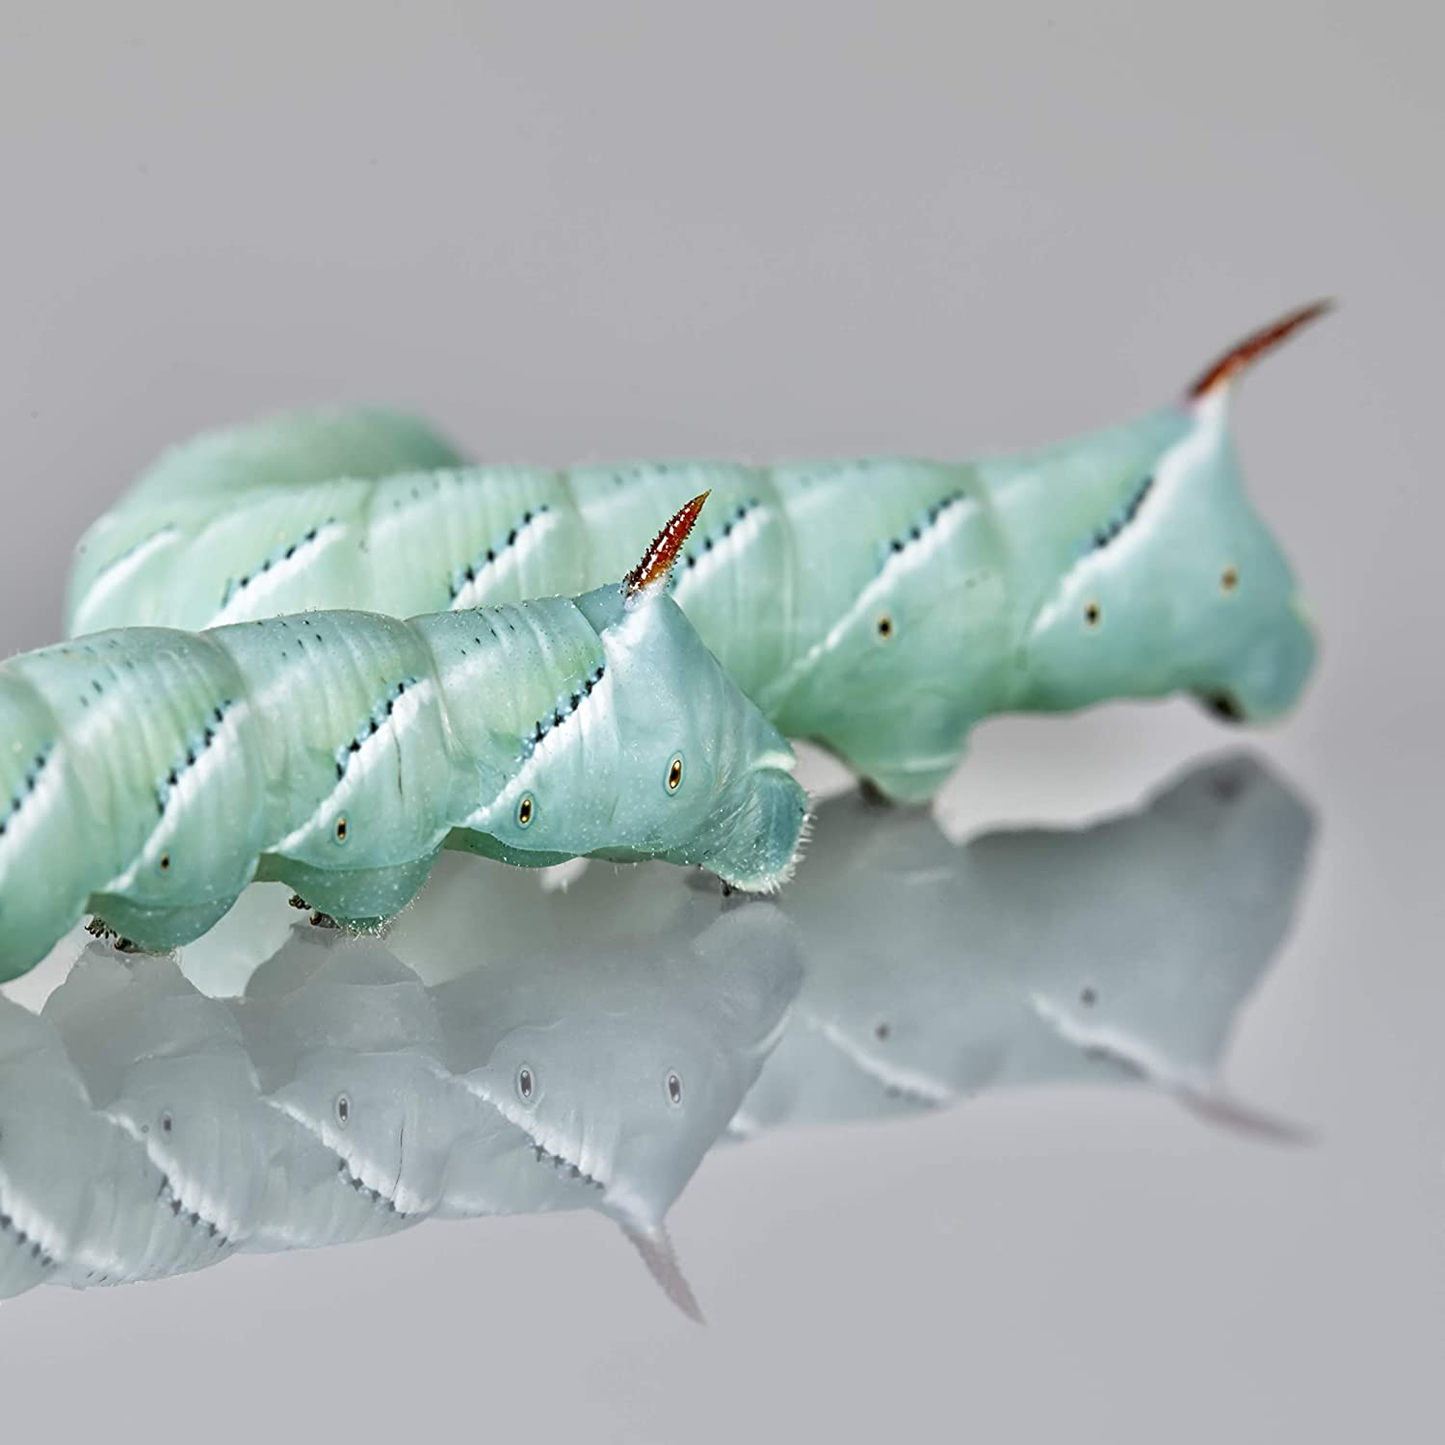 Dbdpet Premium 20-30Ct Live Hornworms - Food for Bearded Dragons, Leopard Geckos, Frogs, Chameleons, Tegus, and Other Reptiles! Animals & Pet Supplies > Pet Supplies > Reptile & Amphibian Supplies > Reptile & Amphibian Substrates DBDPet   